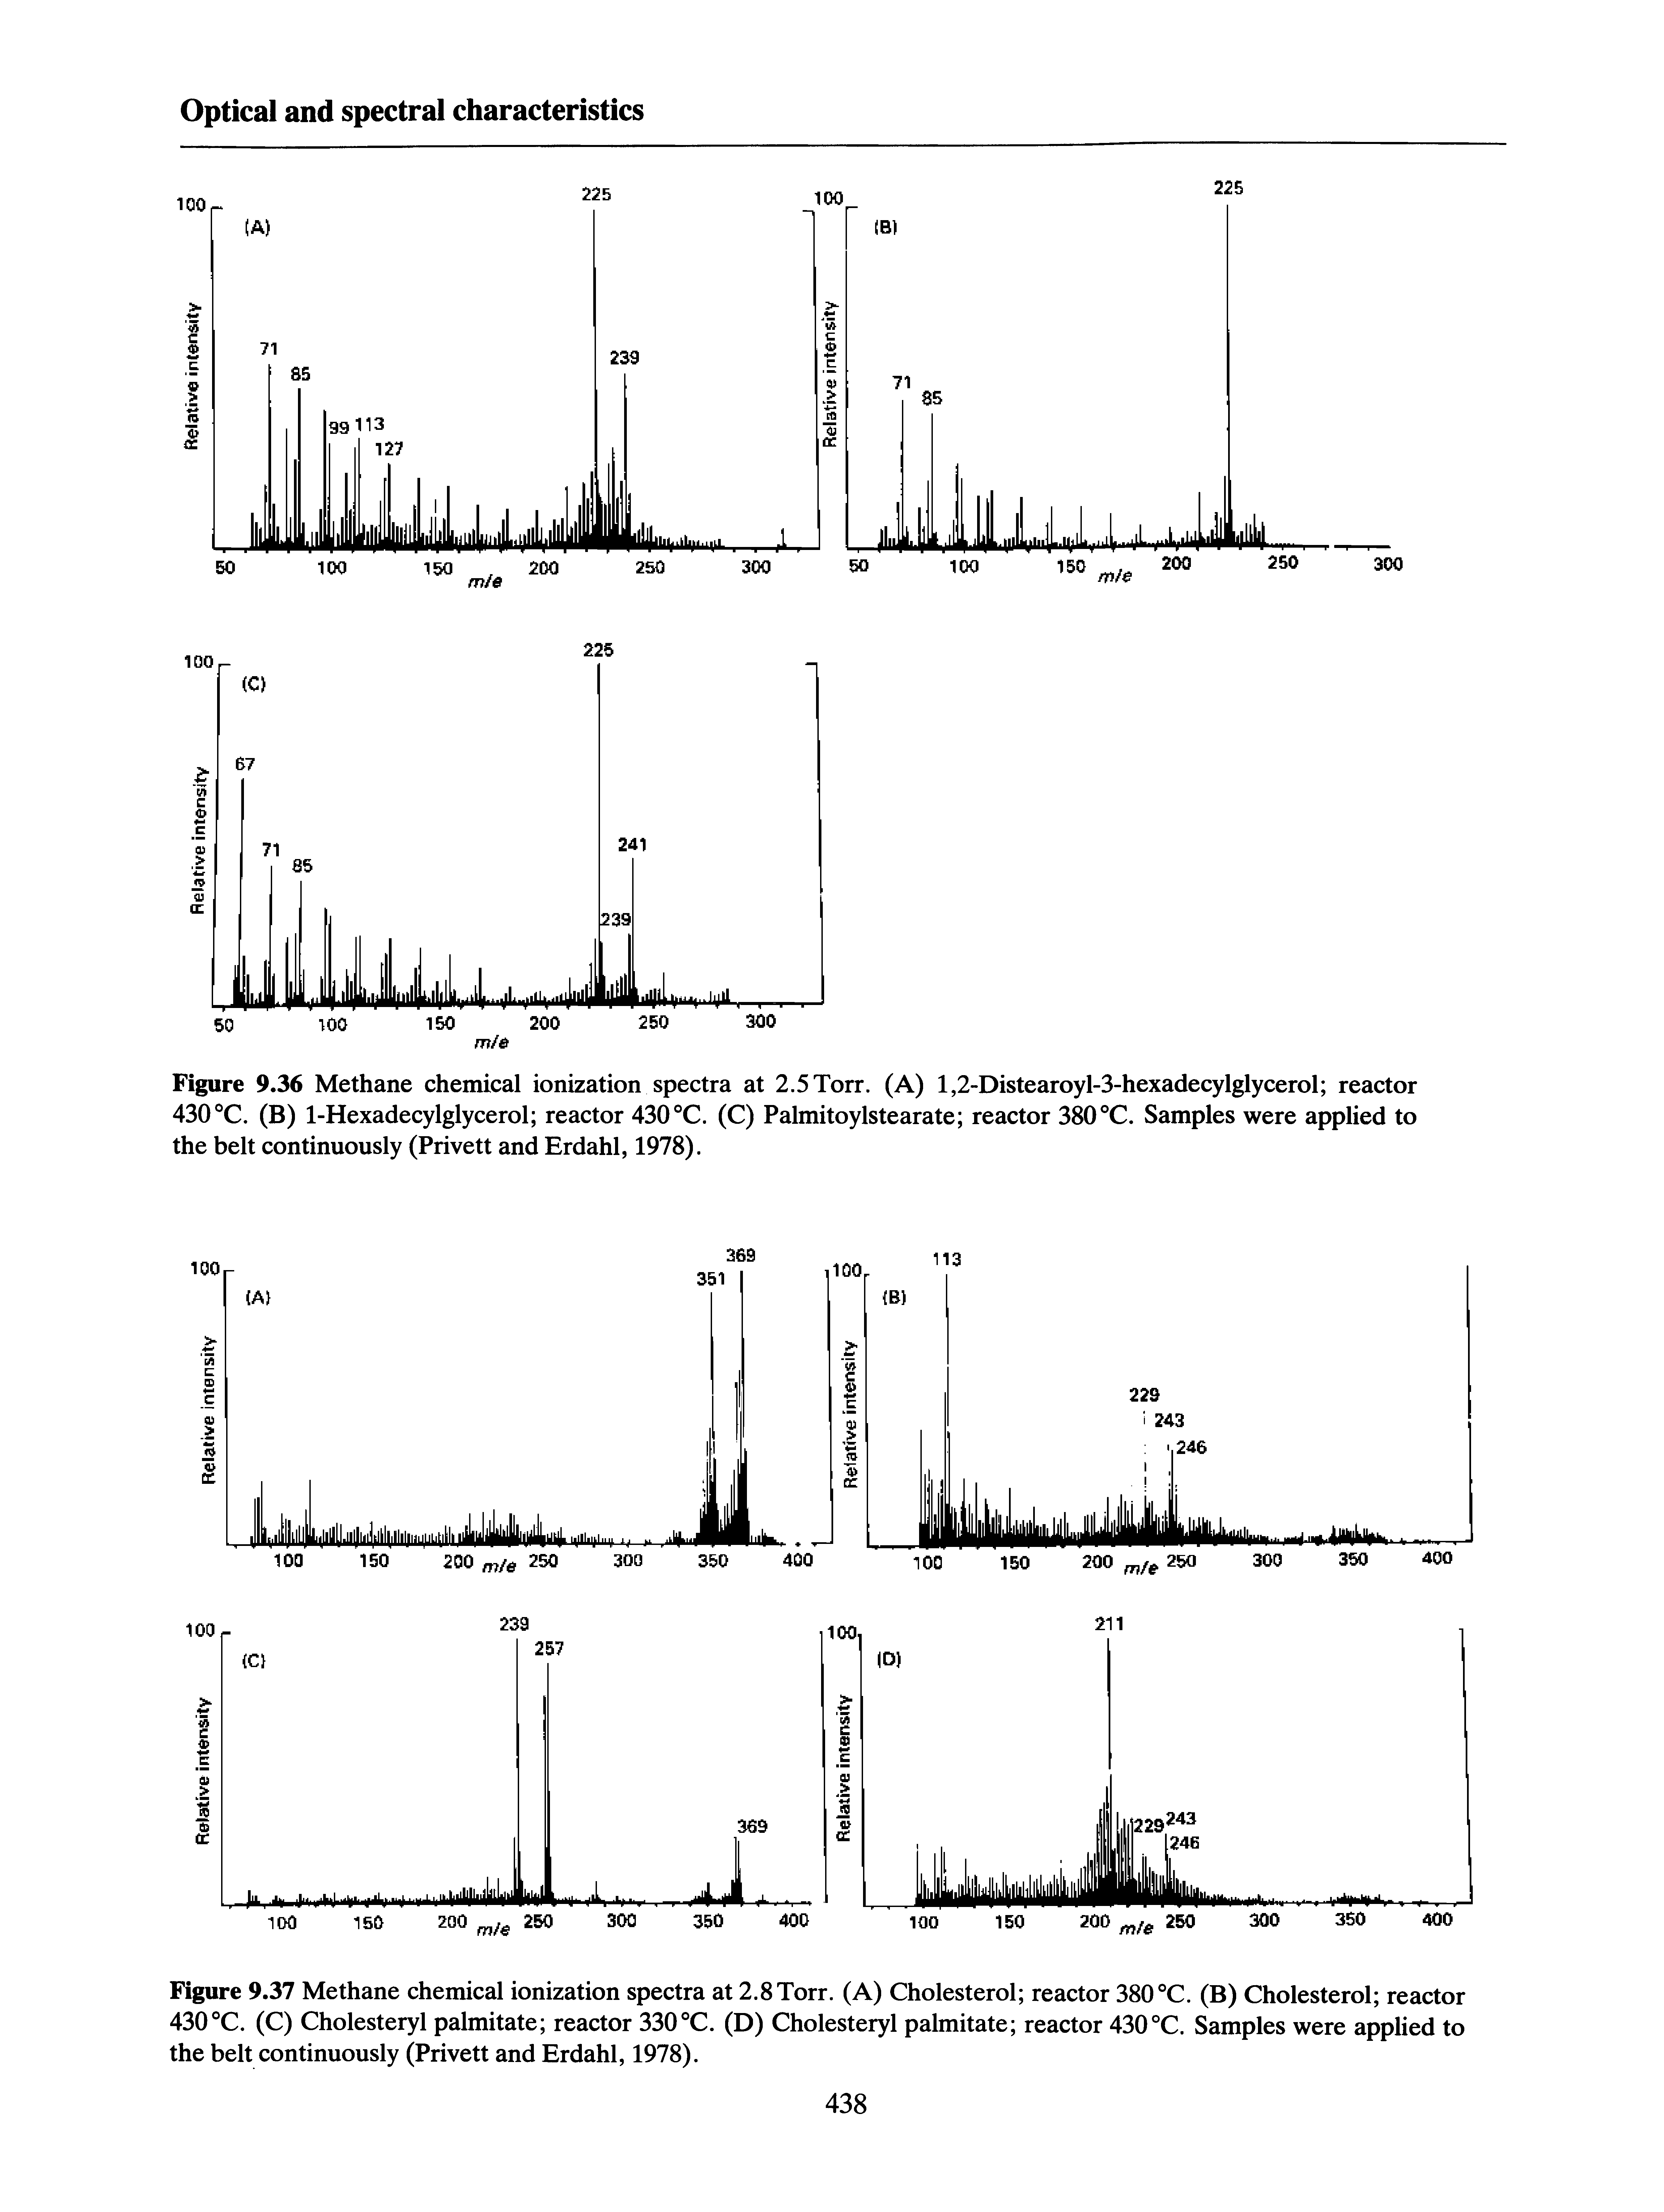 Figure 9.37 Methane chemical ionization spectra at 2.8Torr. (A) Cholesterol reactor 380 C. (B) Cholesterol reactor 430 °C. (C) Cholesteryl palmitate reactor 330 C. (D) Cholesteryl palmitate reactor 430 °C. Samples were applied to the belt continuously (Privett and Erdahl, 1978).